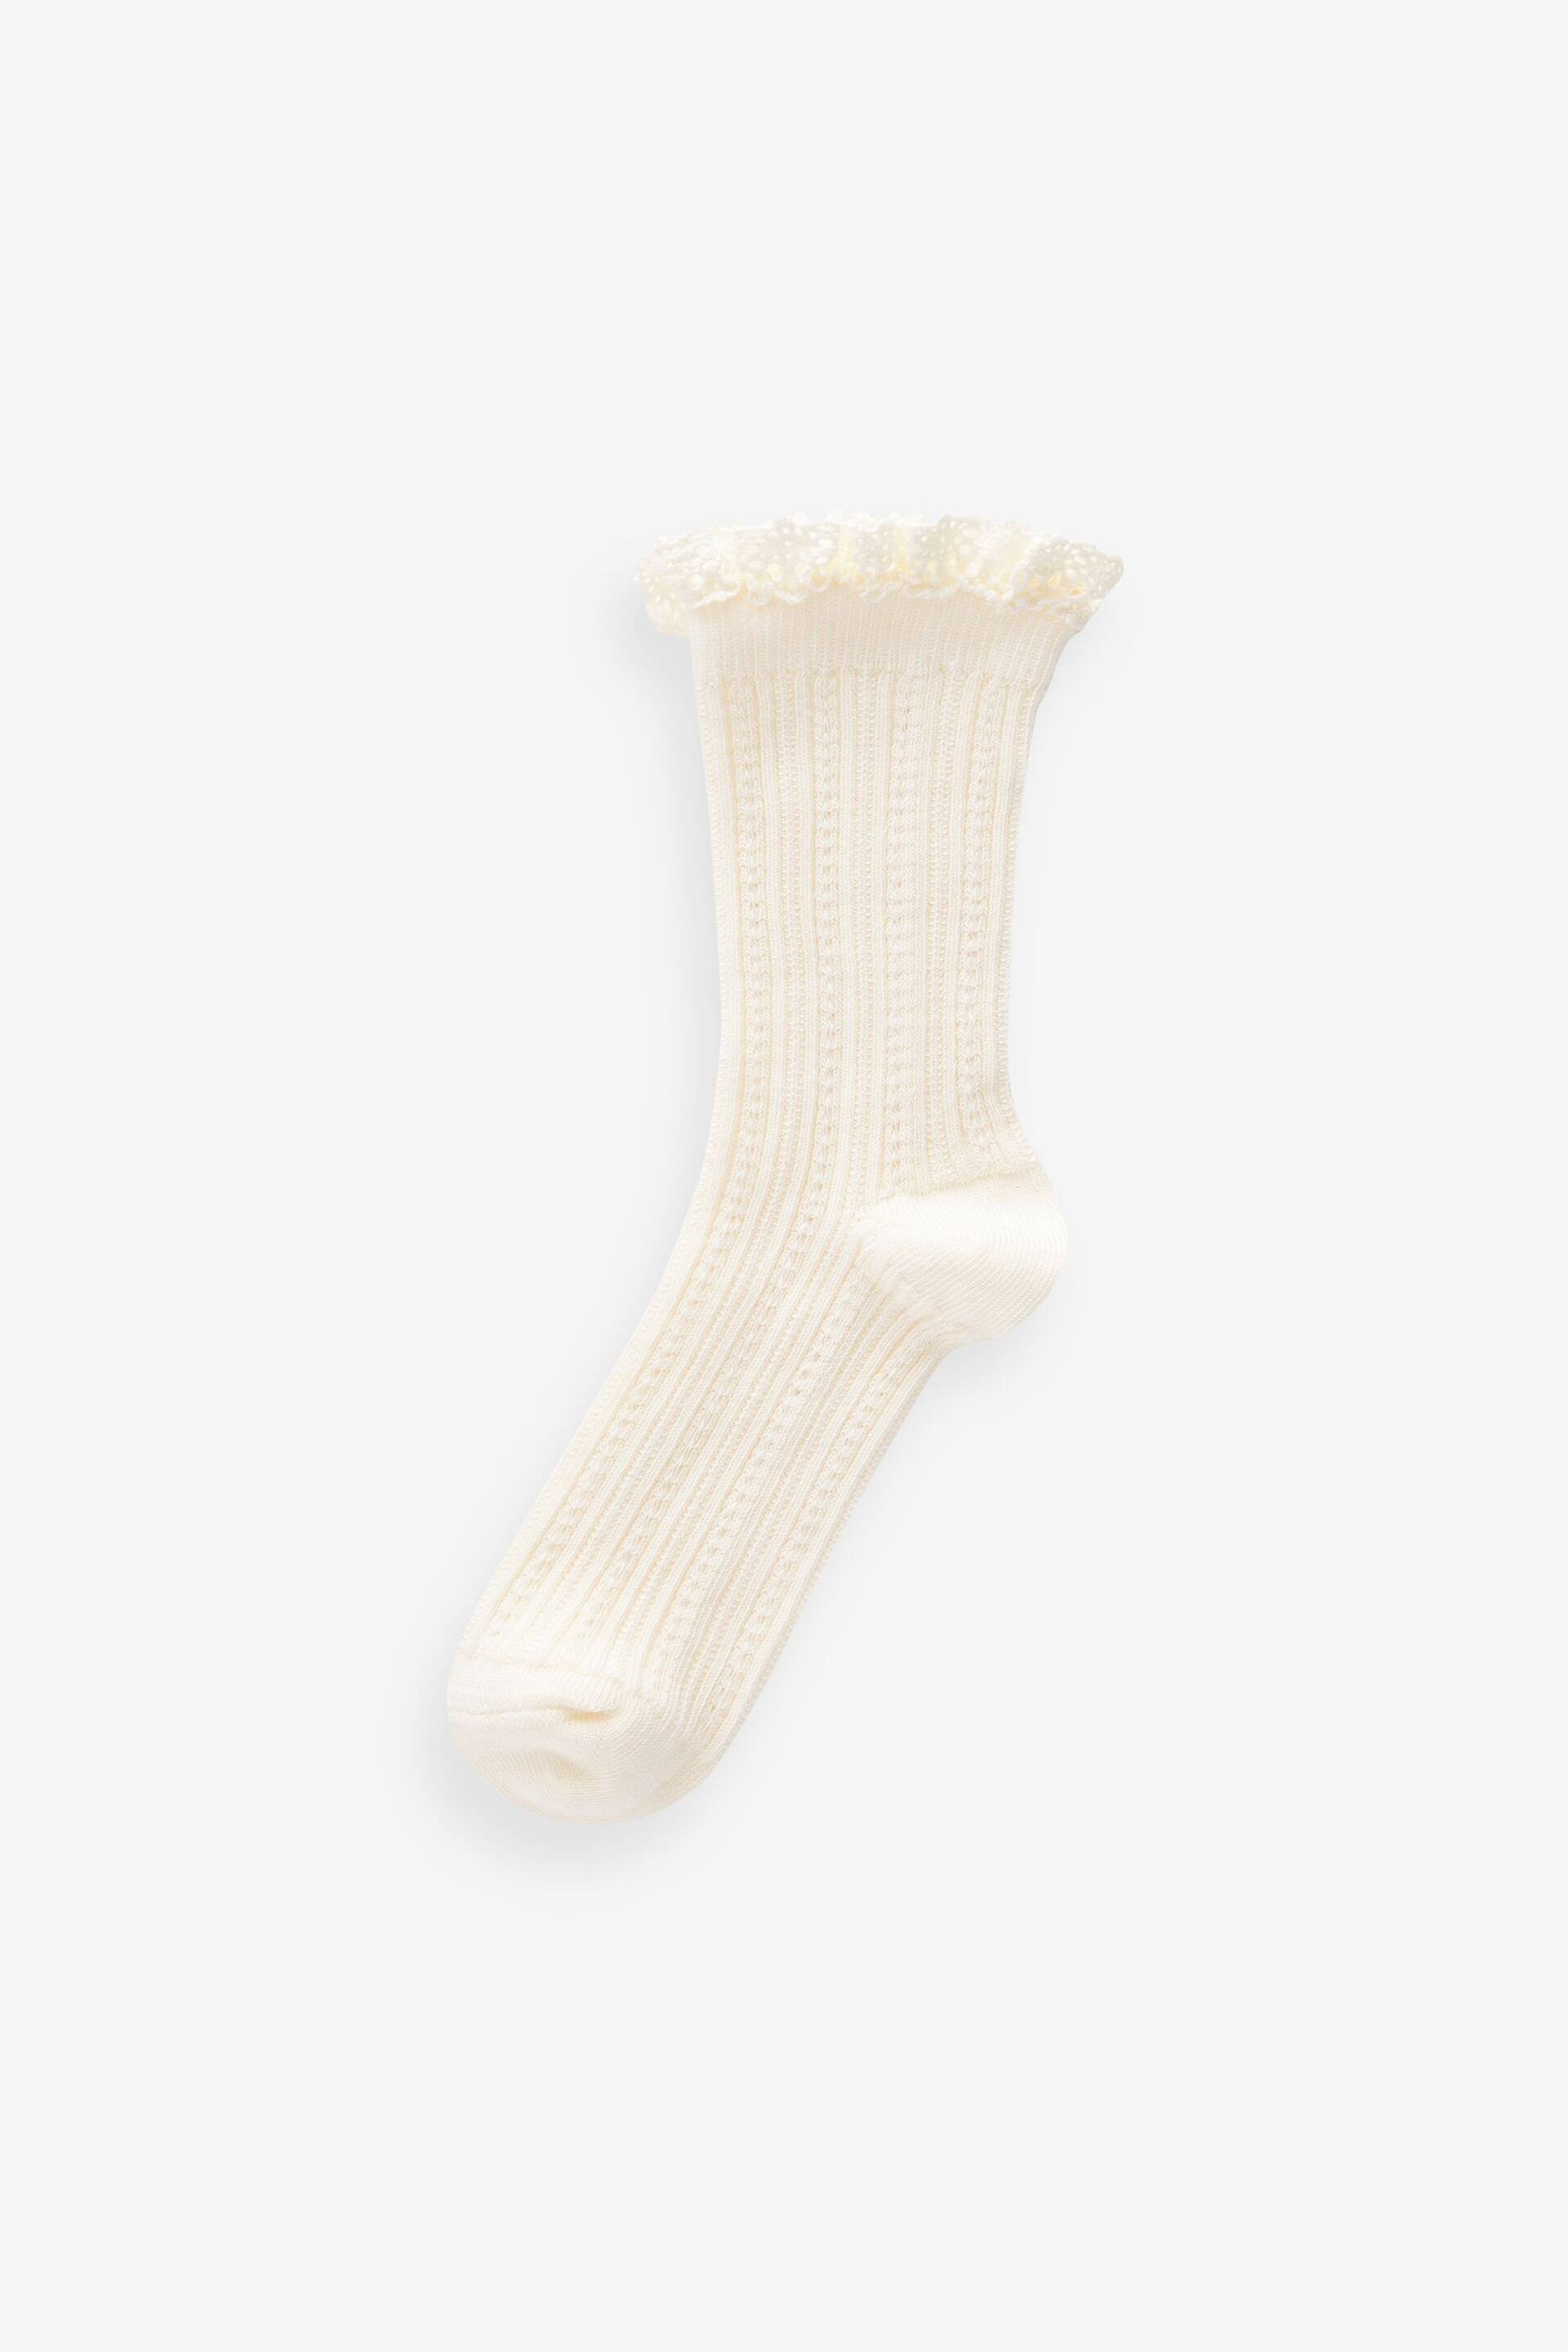 Cream and Green Cotton Rich Ruffle Frill Ankle Socks 2 Pack - Image 3 of 3